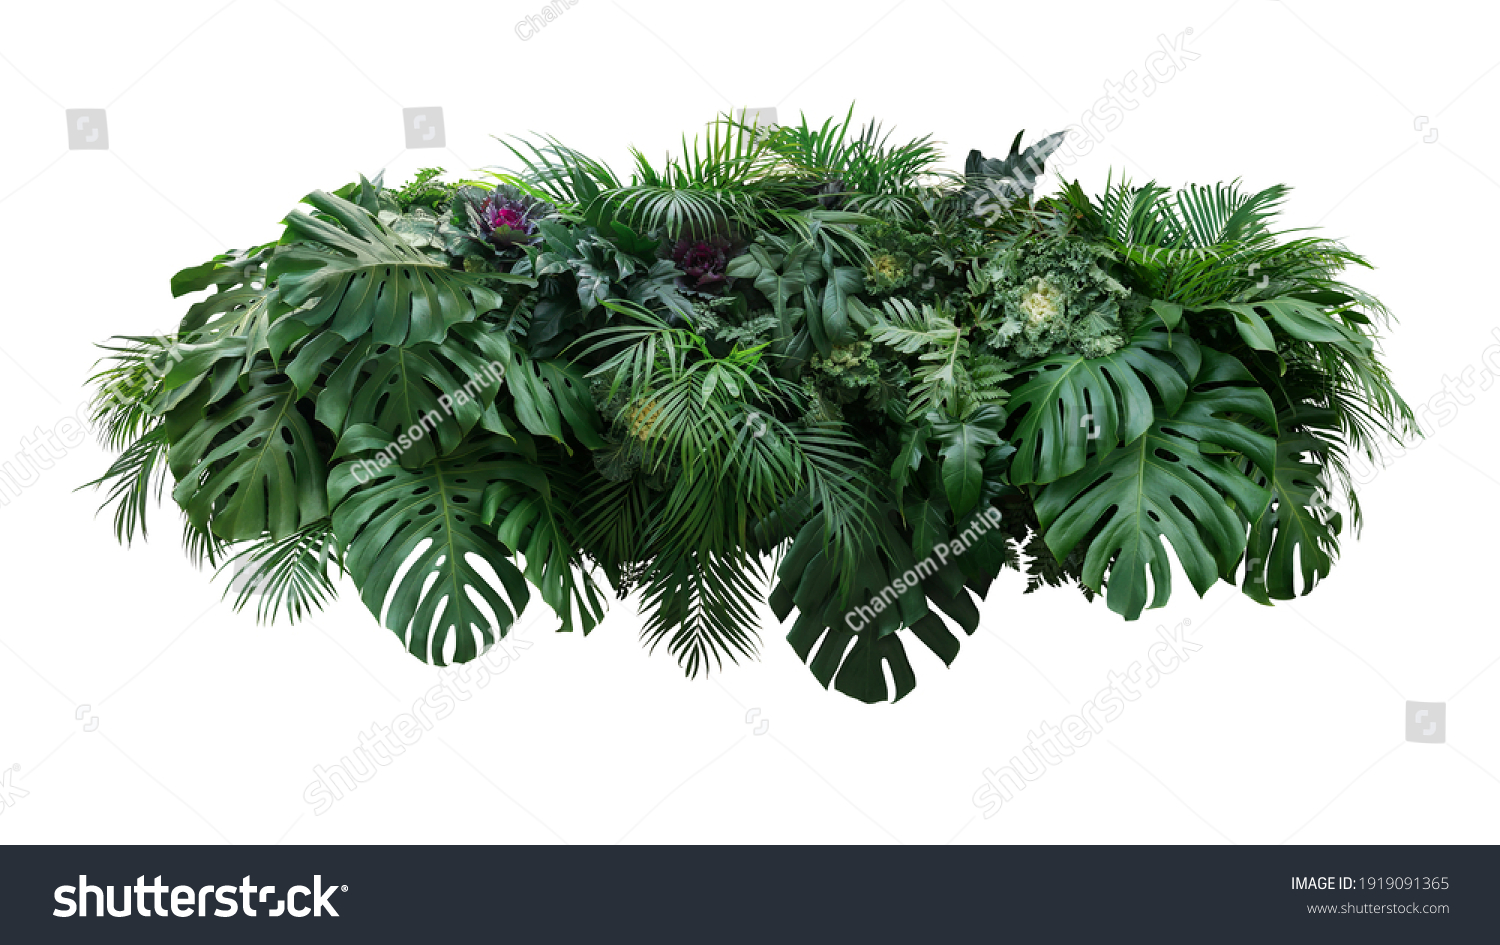 Tropical leaves foliage plant jungle bush floral arrangement nature backdrop with Monstera and tropic plants palm leaves isolated on white background, clipping path included. #1919091365